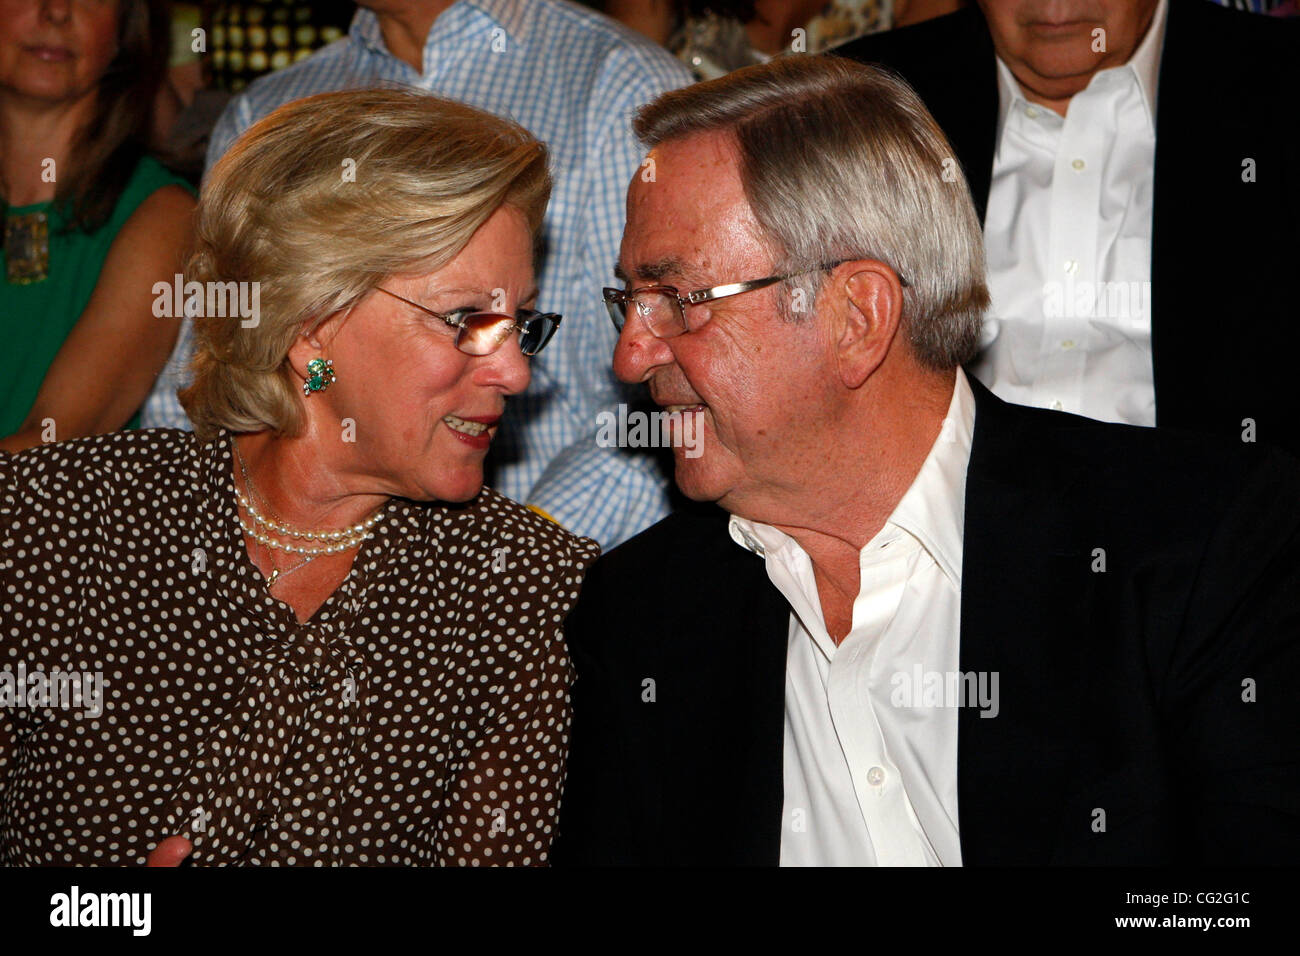 Sept. 11, 2011 - Athens, Greece - King CONSTANTINE with his wife Queen ANNE-MARIE of Greece attends the concert of the Greek composer Stavros Xarhakos at the ancient theater of Herodes Atticus. (Credit Image: © Aristidis Vafeiadakis/ZUMAPRESS.com) Stock Photo